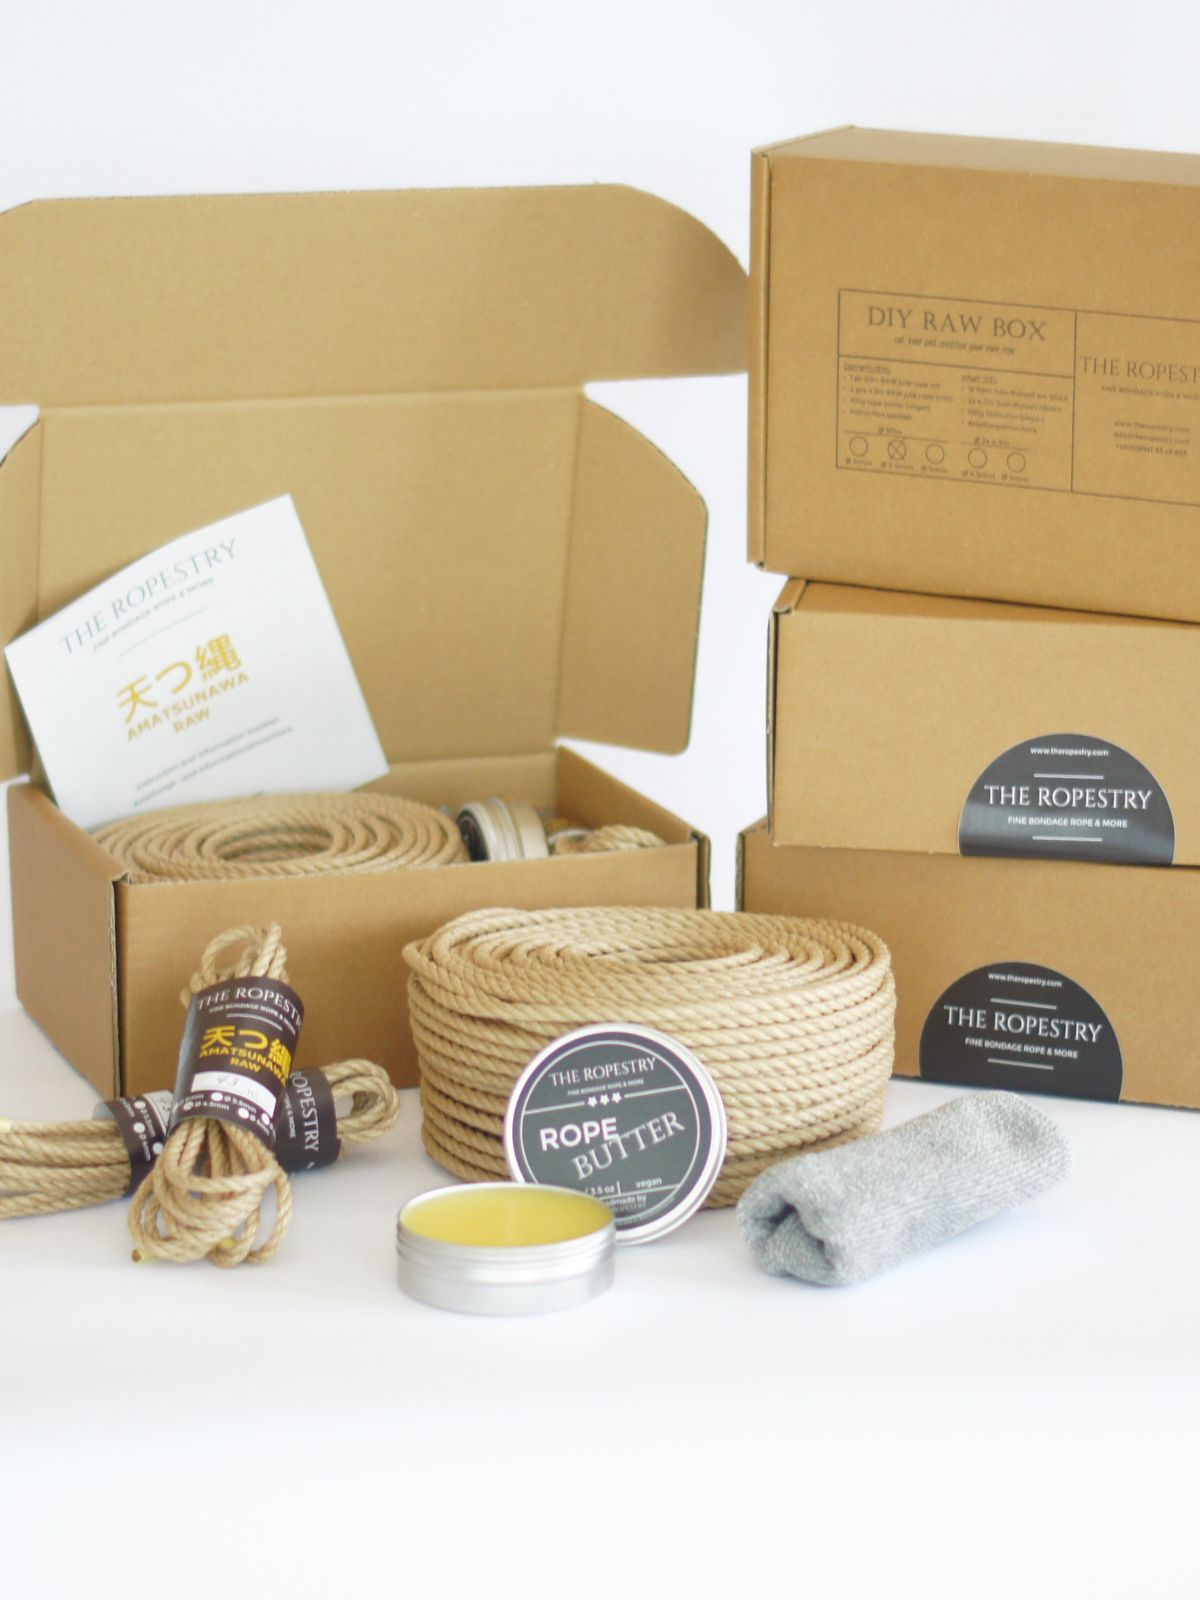 DIY RAW BOX - 50 m raw rope, 2x 4.3 m thin ropes, rope butter, storage box, instruction booklet and FREE microfibre cloth